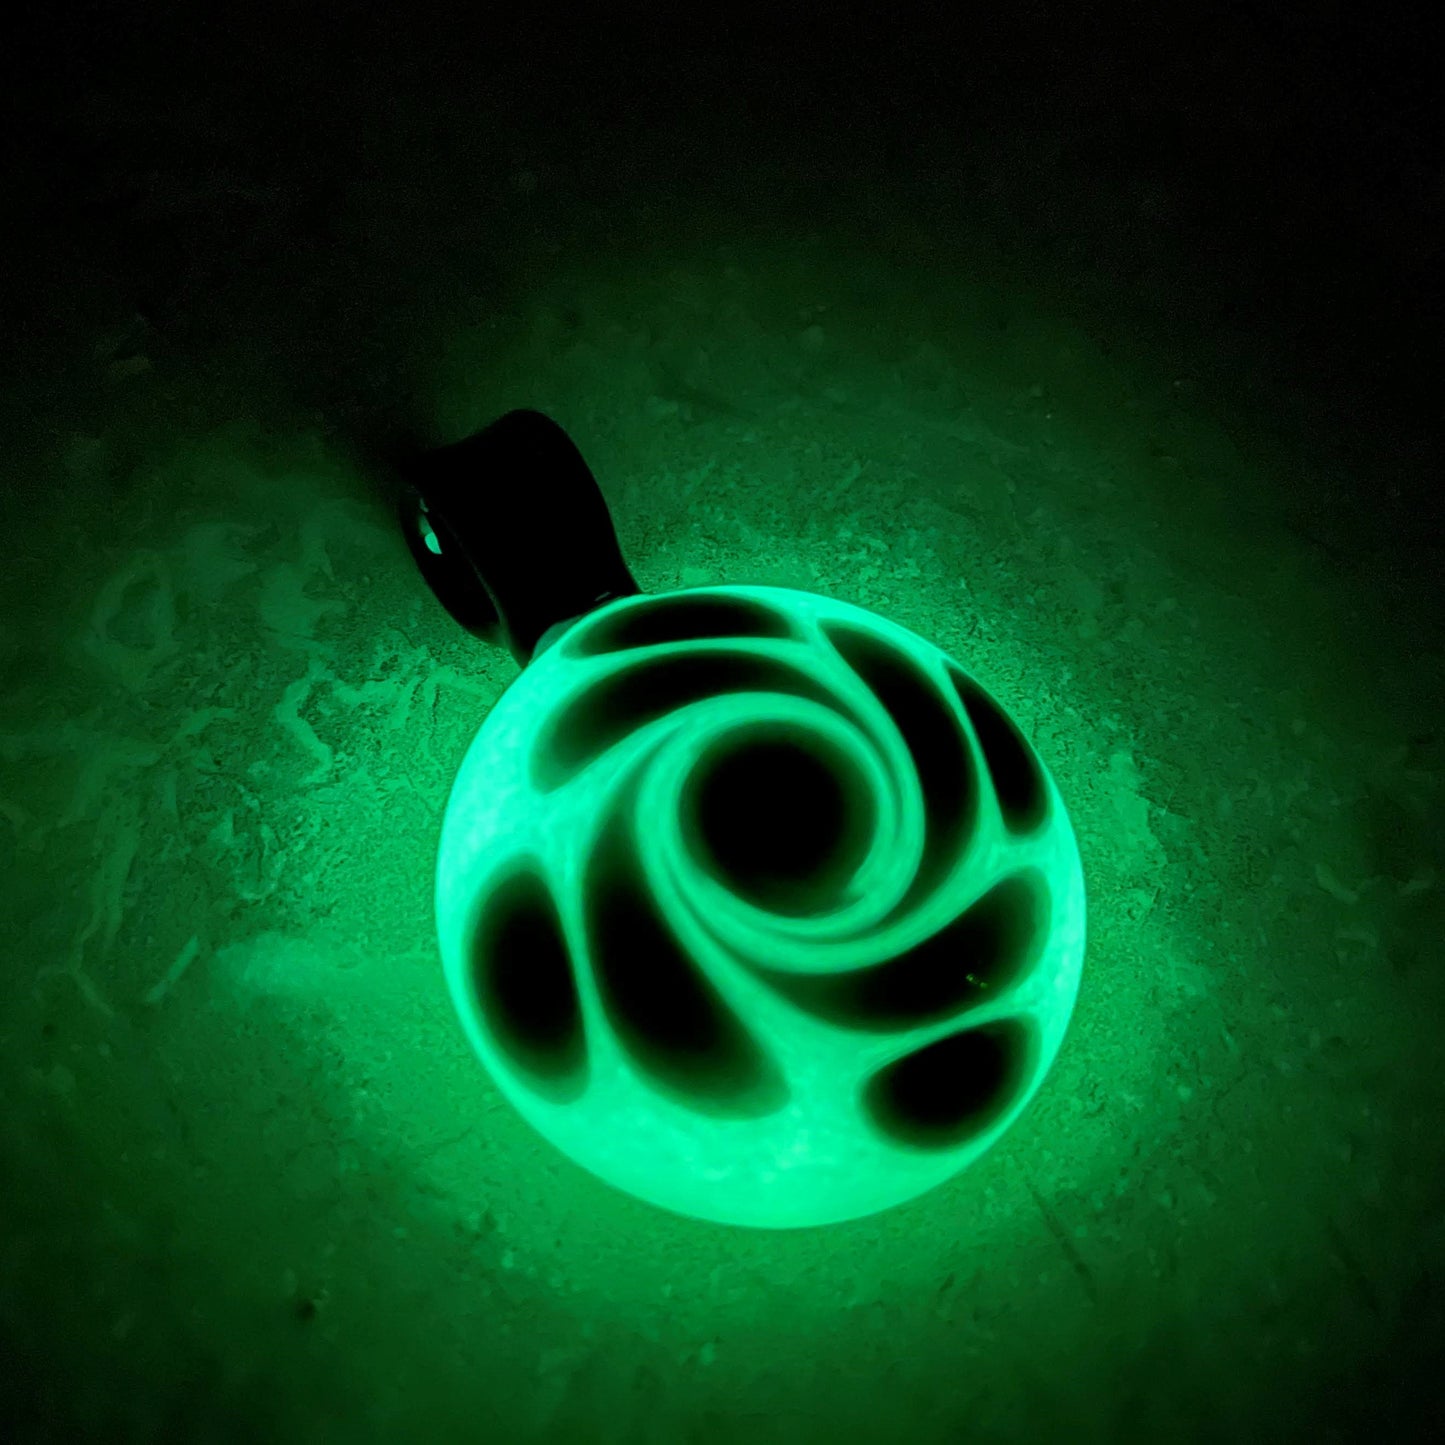 Glow-In-The-Dark Memorial Pendant with Pinwheel Pattern Glowing Necklace Jewelry Pendant Fairy Glowing Necklace Keepsake Pendant